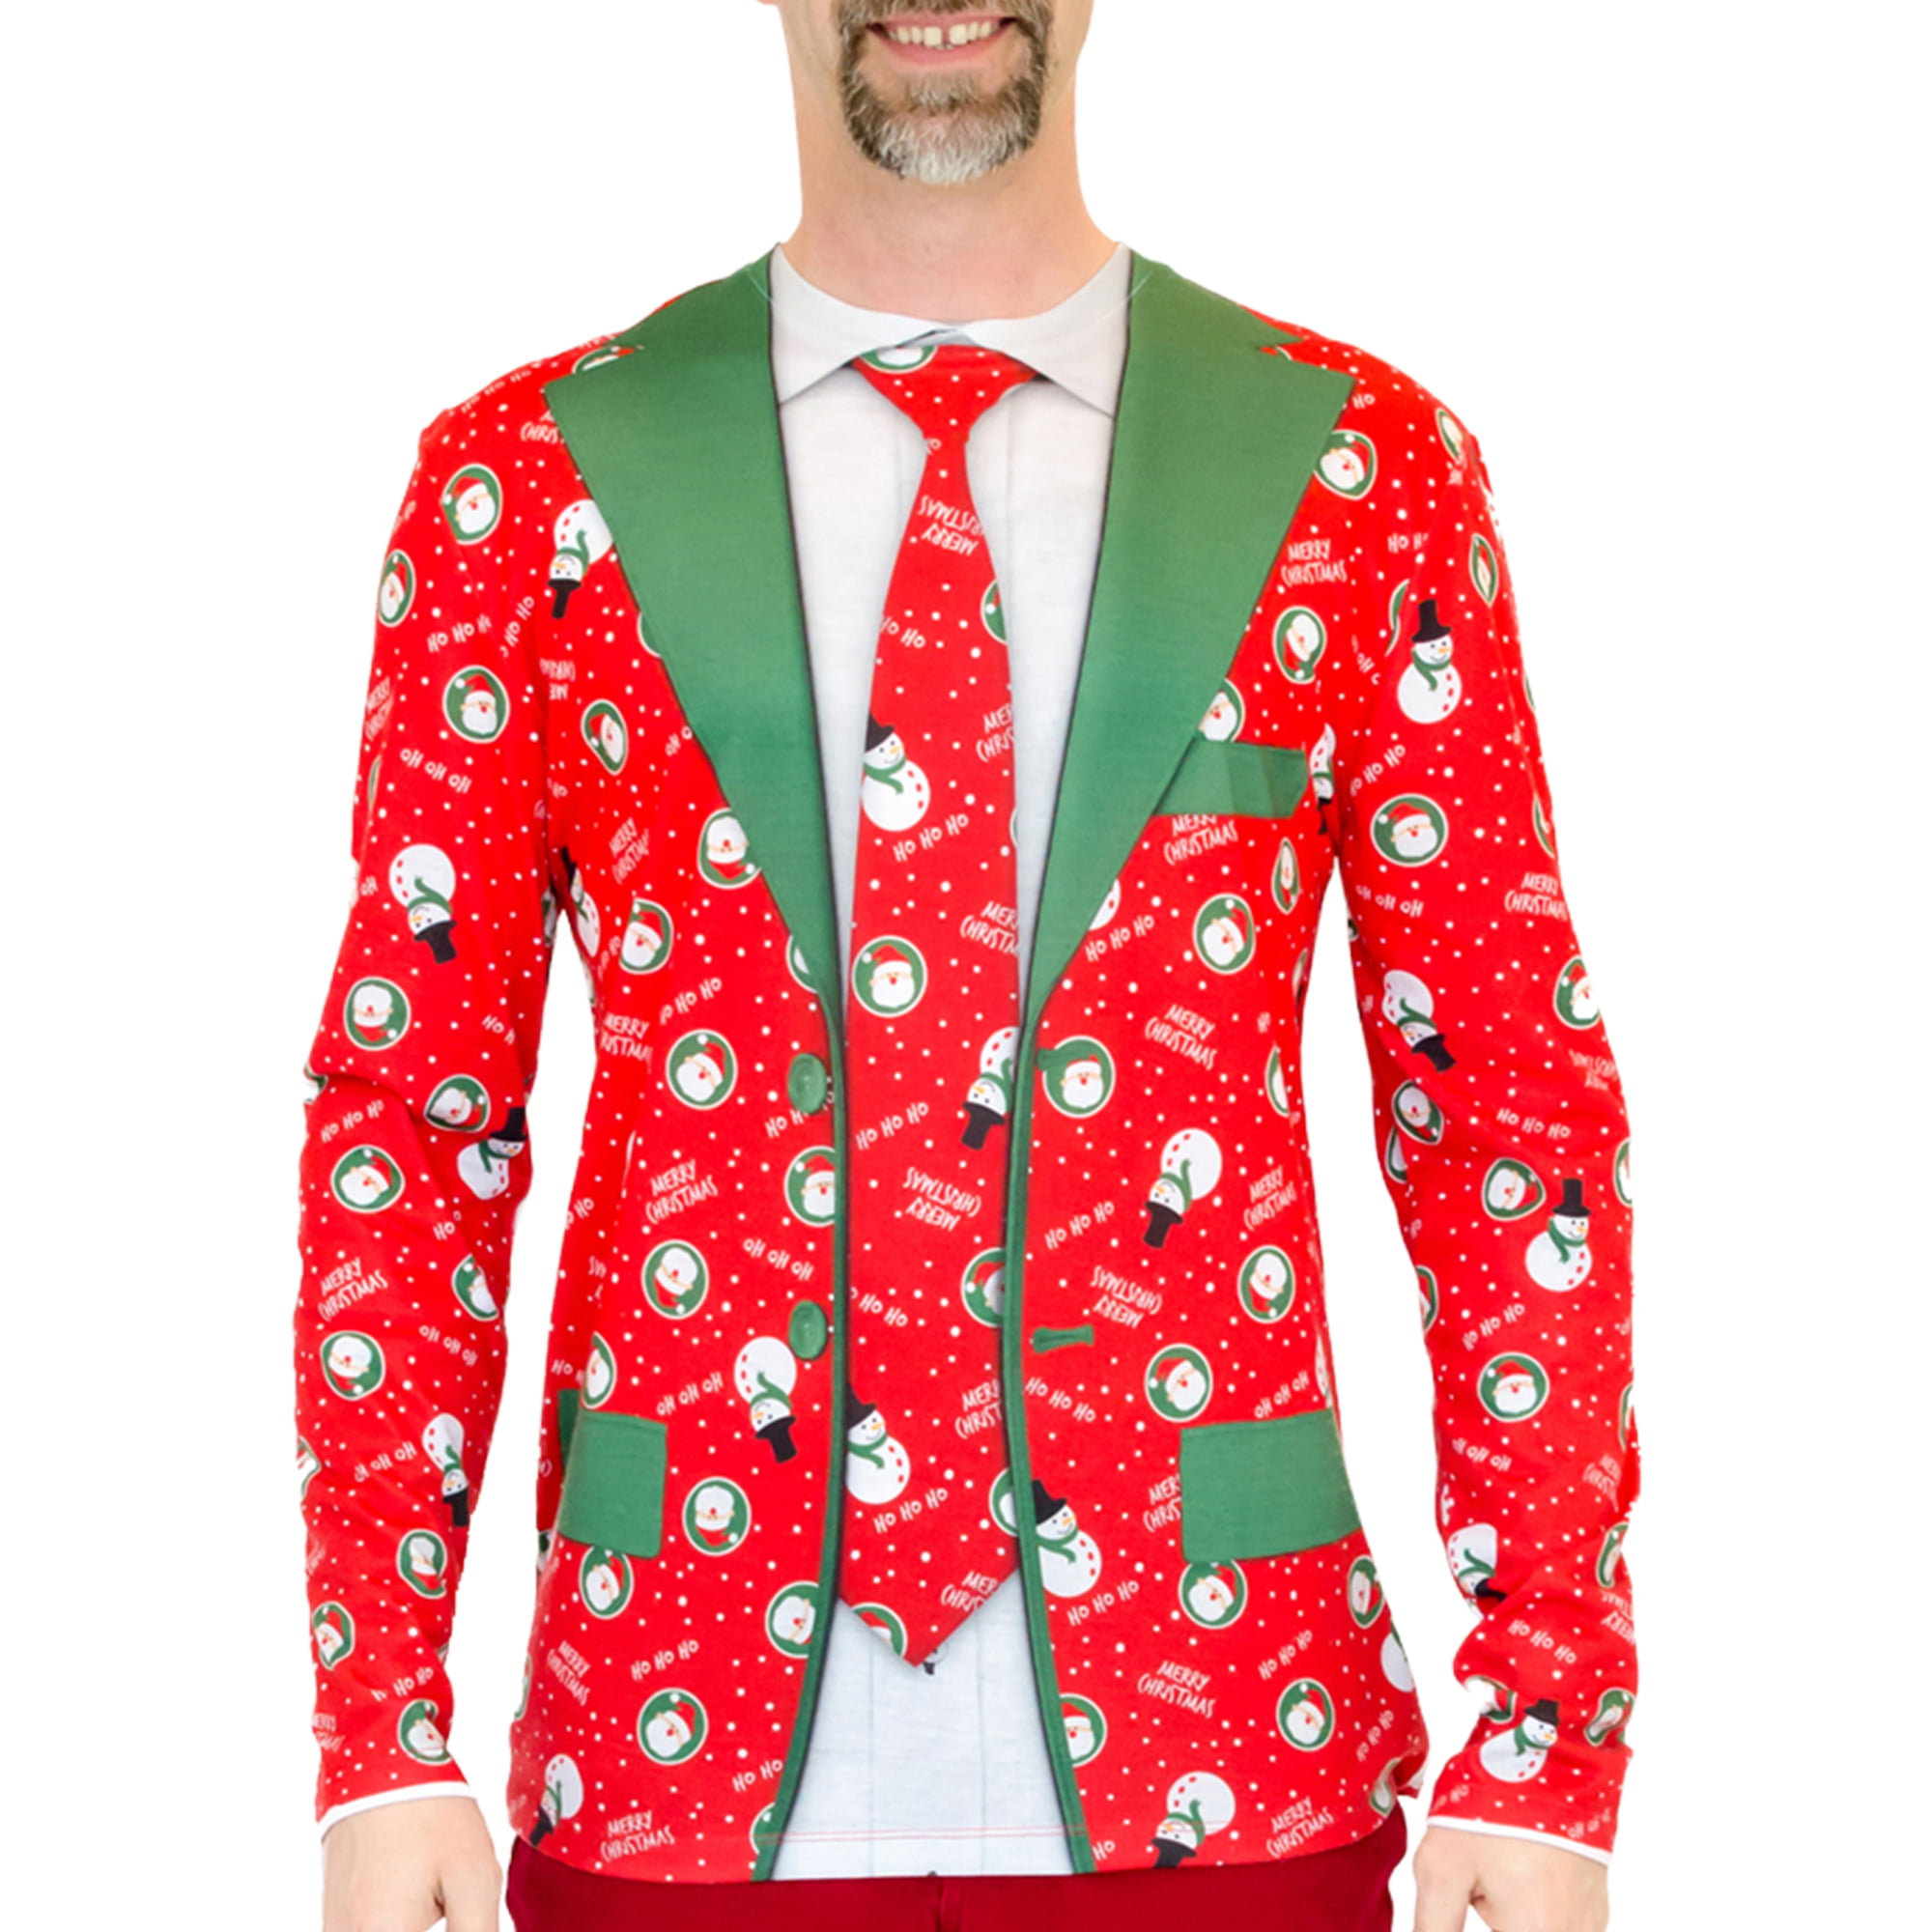 NEW Men's Cat Christmas Holiday Blazer Suit Jacket Tie Ugly Sweater Party RED 